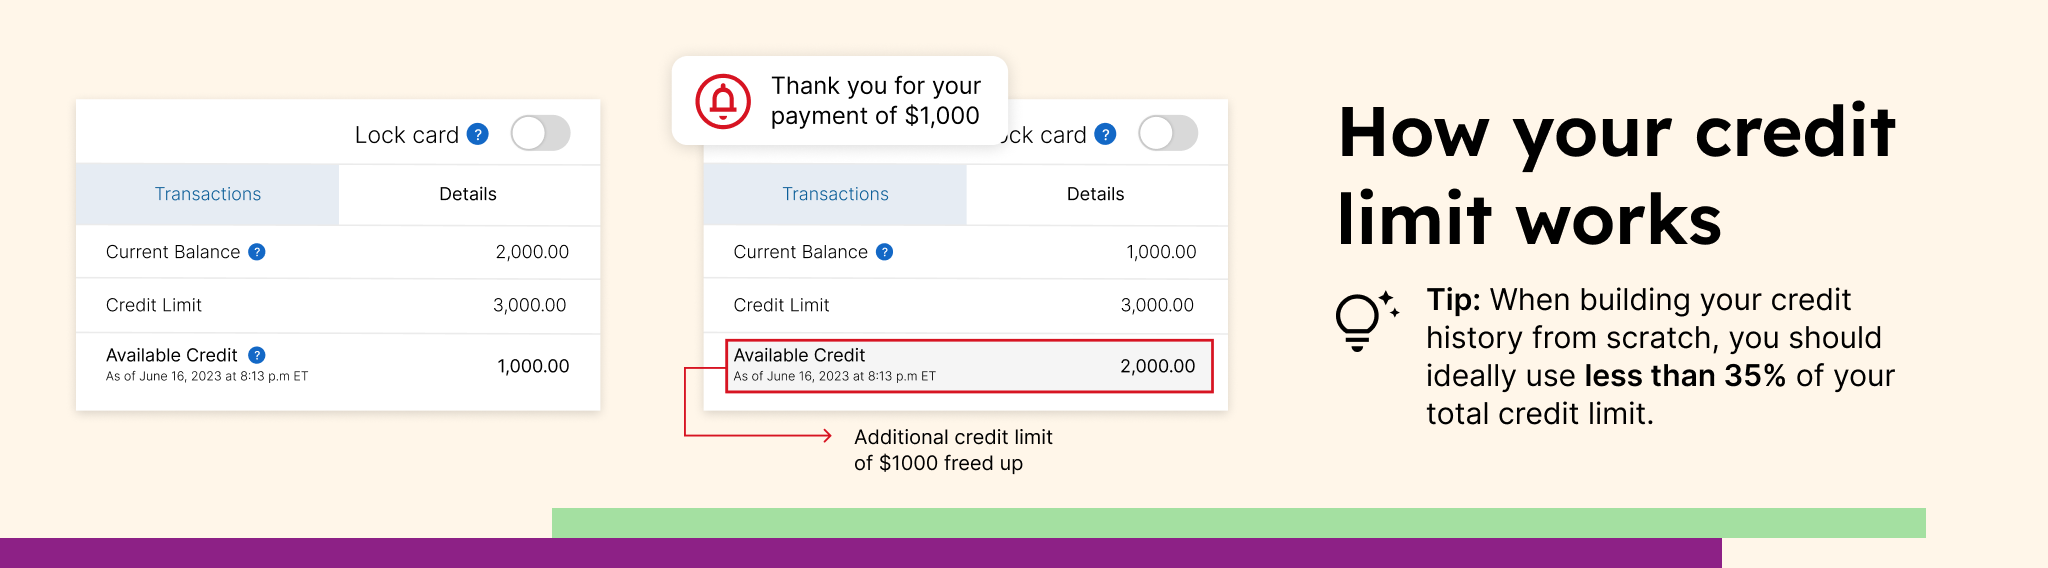 How your credit limit works